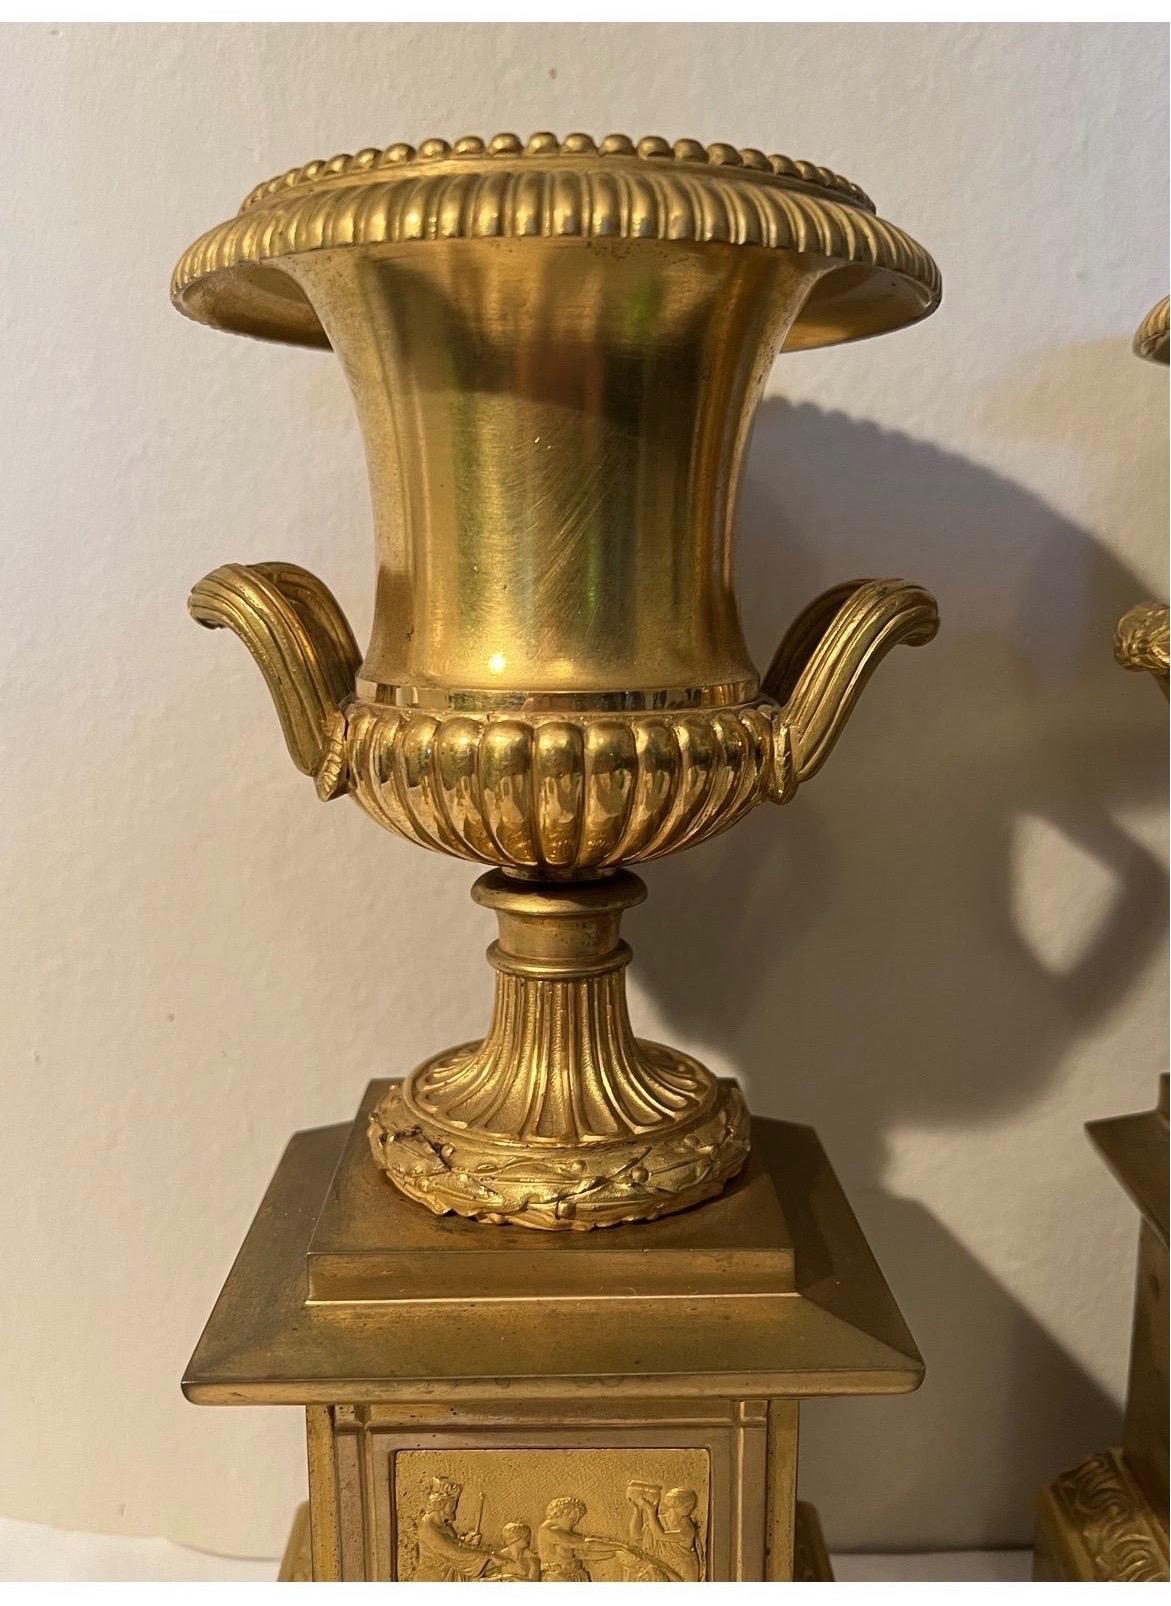 These urns are extremely high quality in decoration and casting. True Neoclassical gilt bronze grand tour objects and what makes it better? A PAIR!.